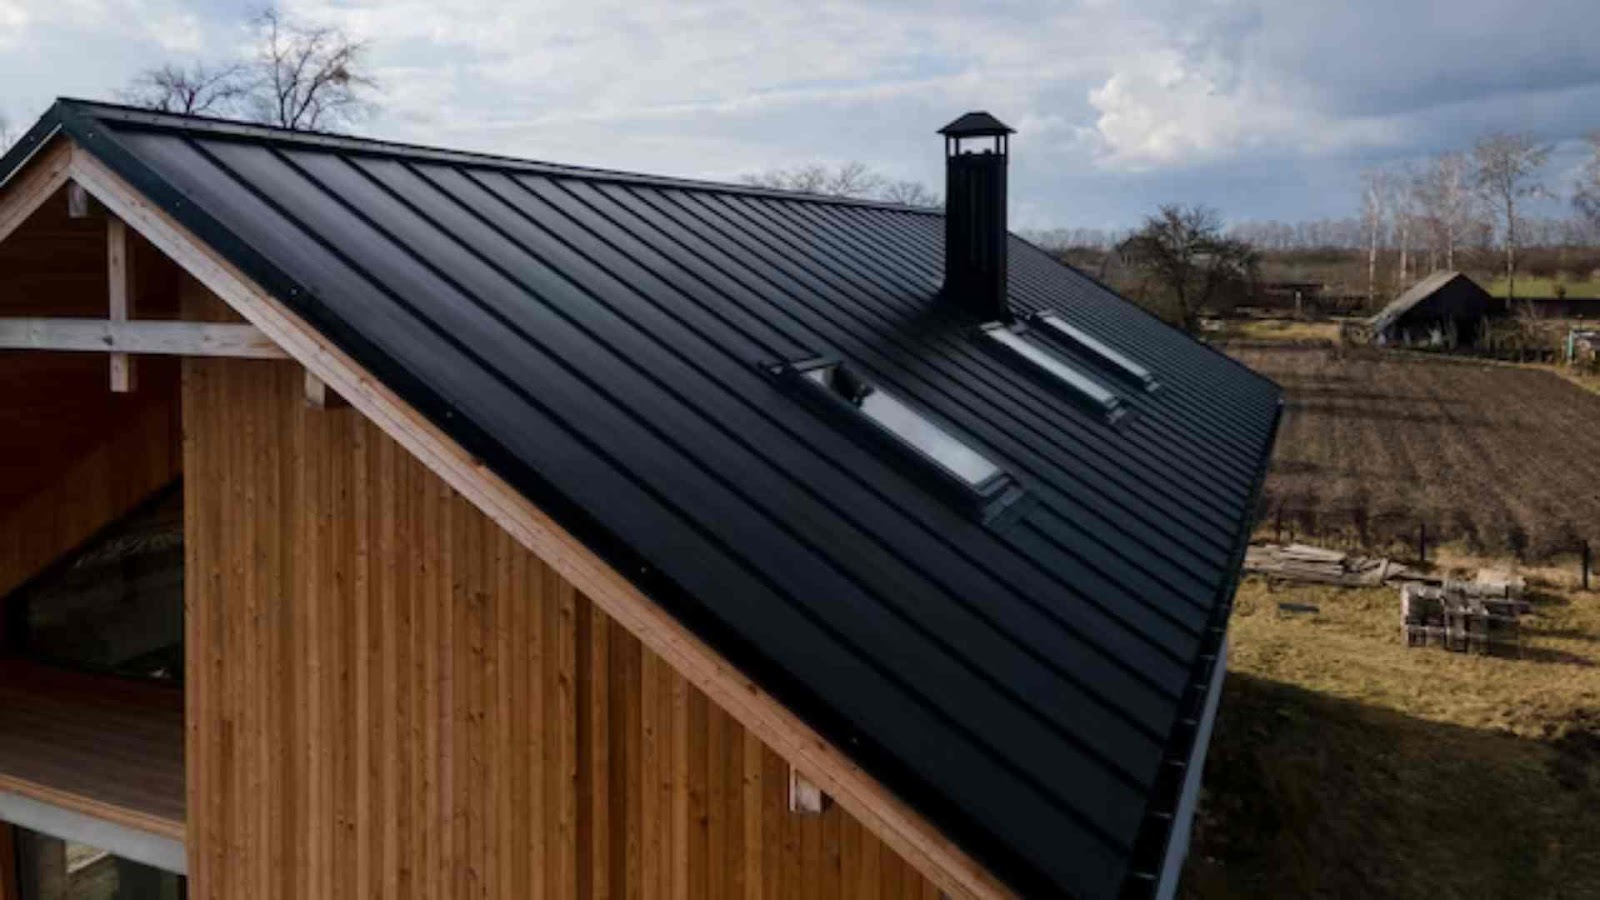 Overview of Shiplap Roof